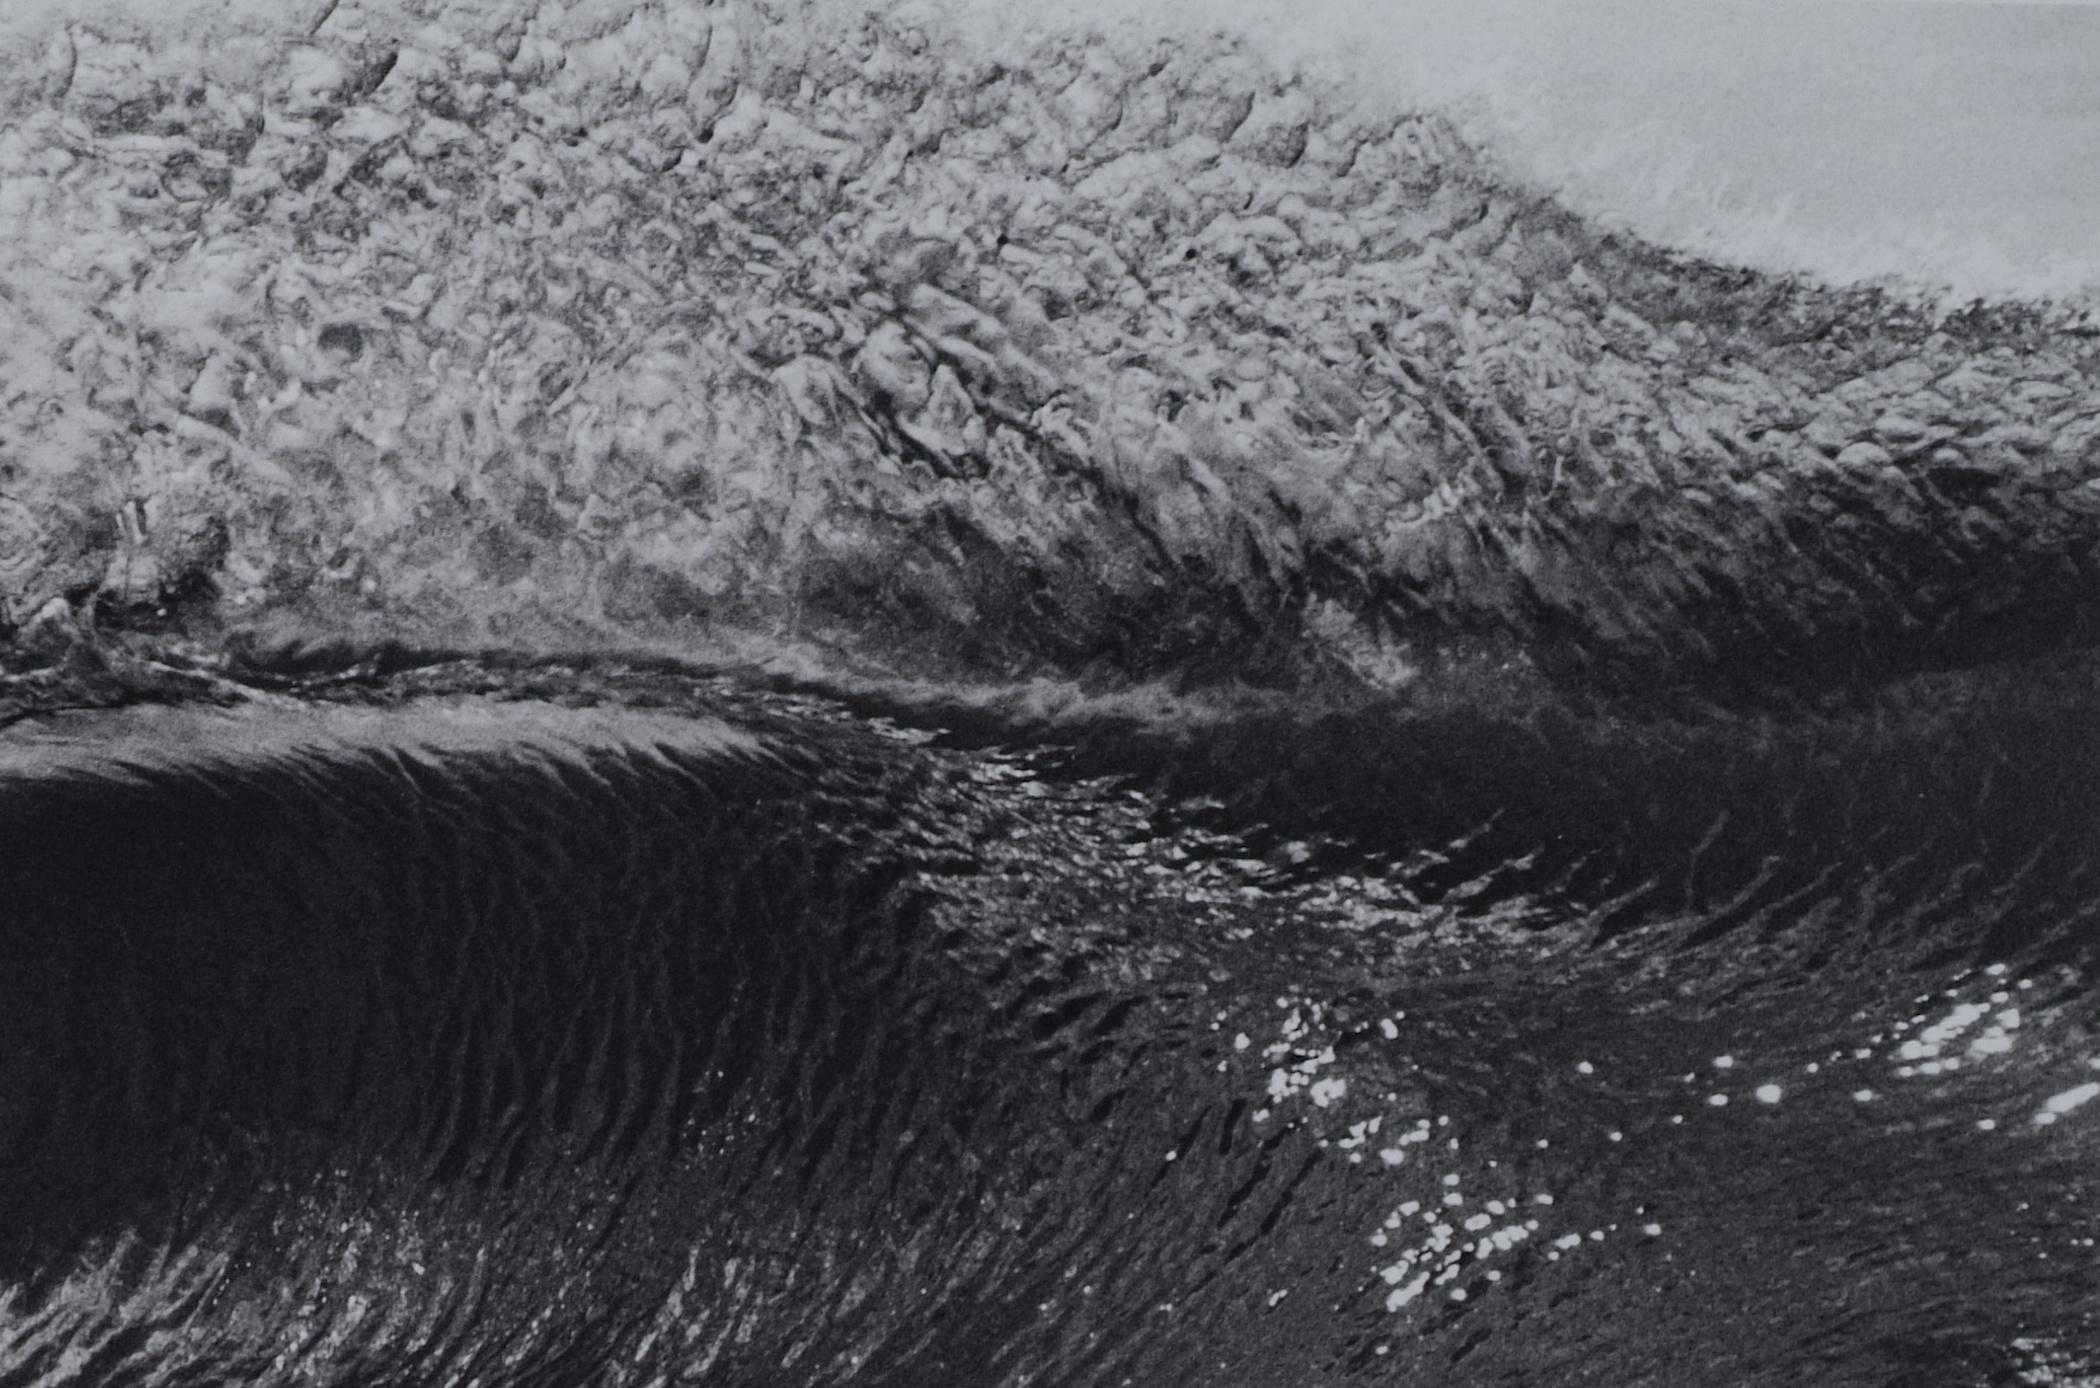 Anthony FRIEDKIN (*1949, America)
Ice Wave, Zuma Beach, California, U.S.A, 2002
Silver Gelatin Print, later print
40.6 x 50.8 cm (16 x 20 in.)
Edition of 25; Ed. no. 12/25
Print only

Born 1949 in Los Angeles, USA, Friedkin currently lives and works